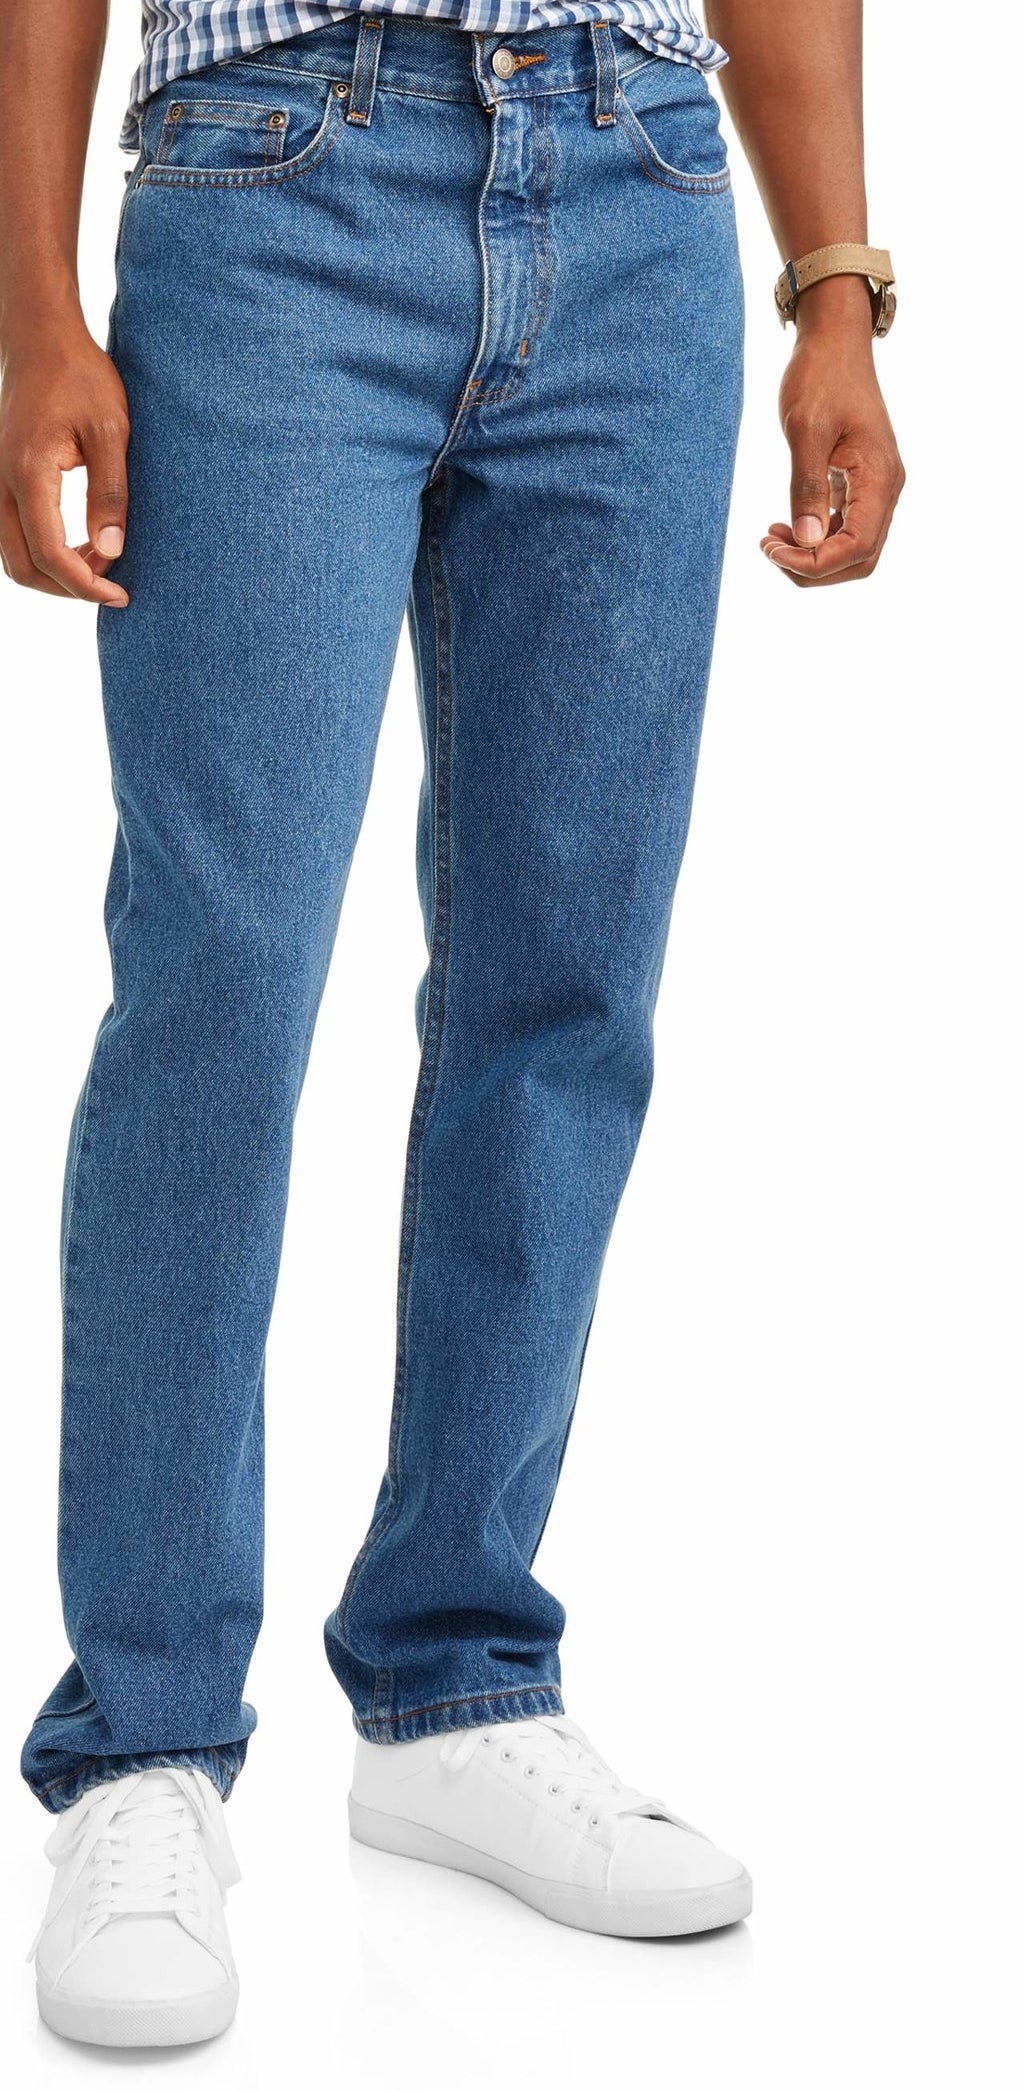 20 Pairs Of The Best Pairs Of Jeans You Can Get At Walmart